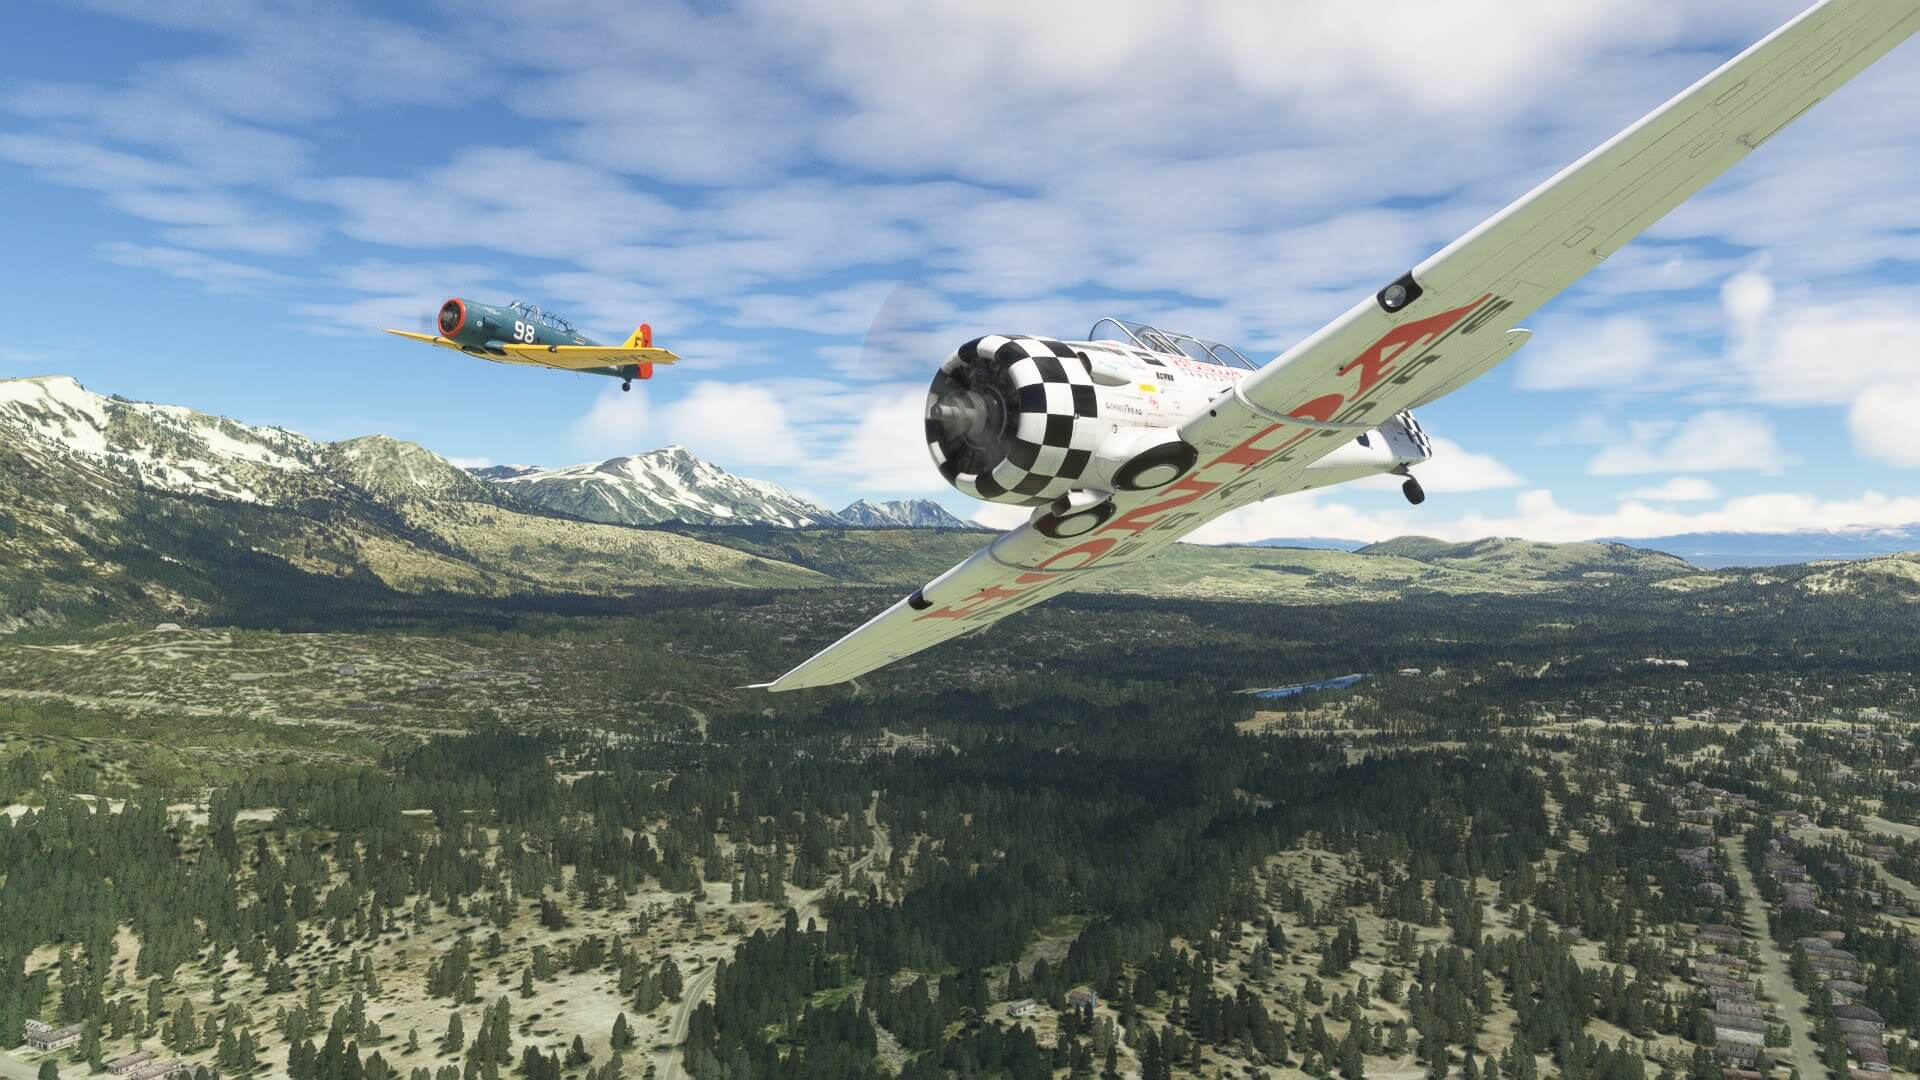 Two Texan T6 aircraft race against one another